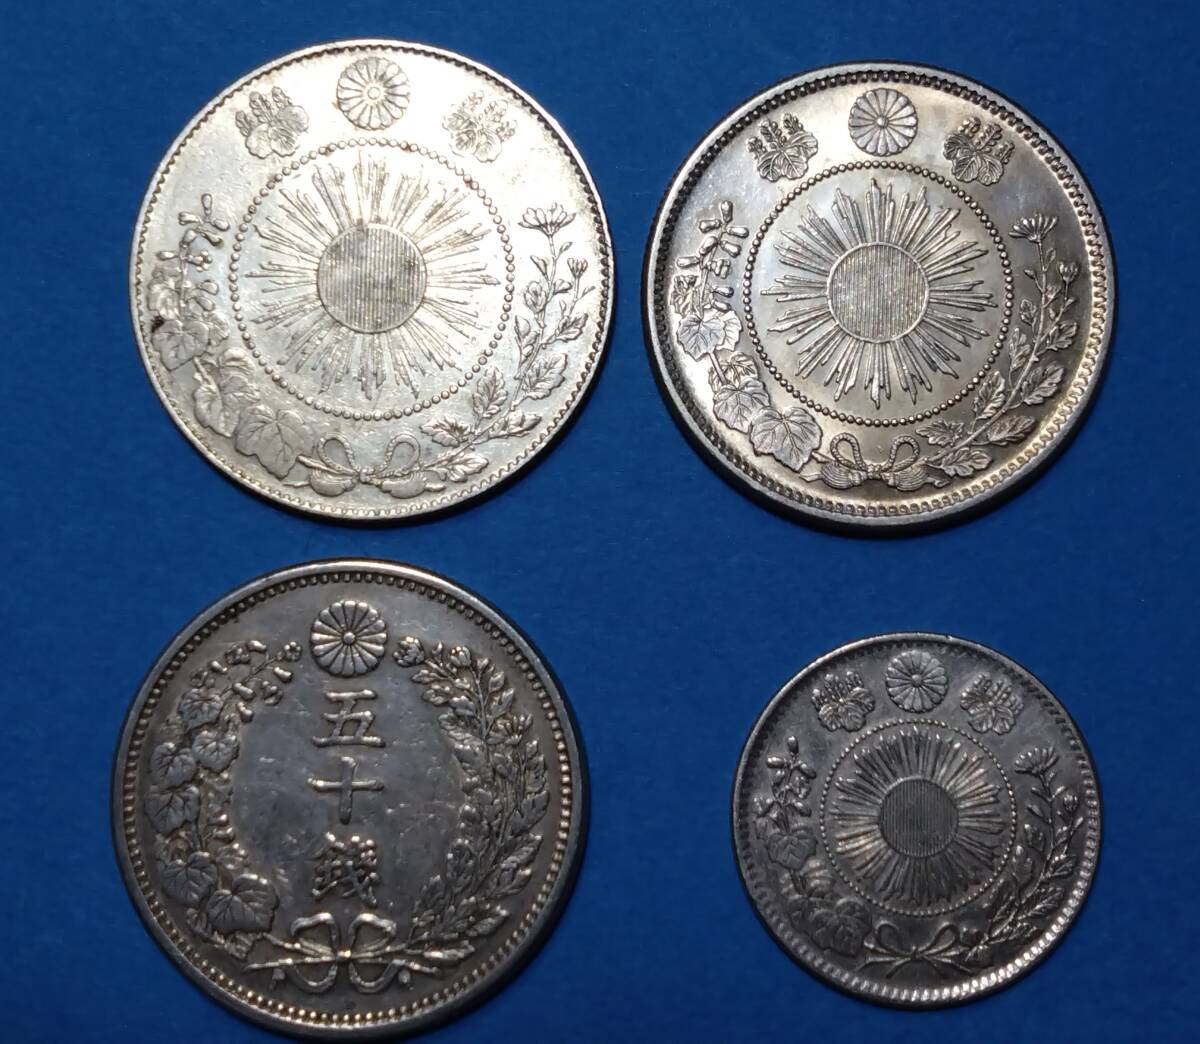  asahi day dragon large silver coin Meiji 4 year latter term molasses leaf . watch stem upper part ream point * asahi day dragon small size silver coin Meiji 4 year * dragon 50 sen silver coin Meiji 6 year missing . branch * asahi day dragon 20 sen silver coin Meiji 4 year missing sen 